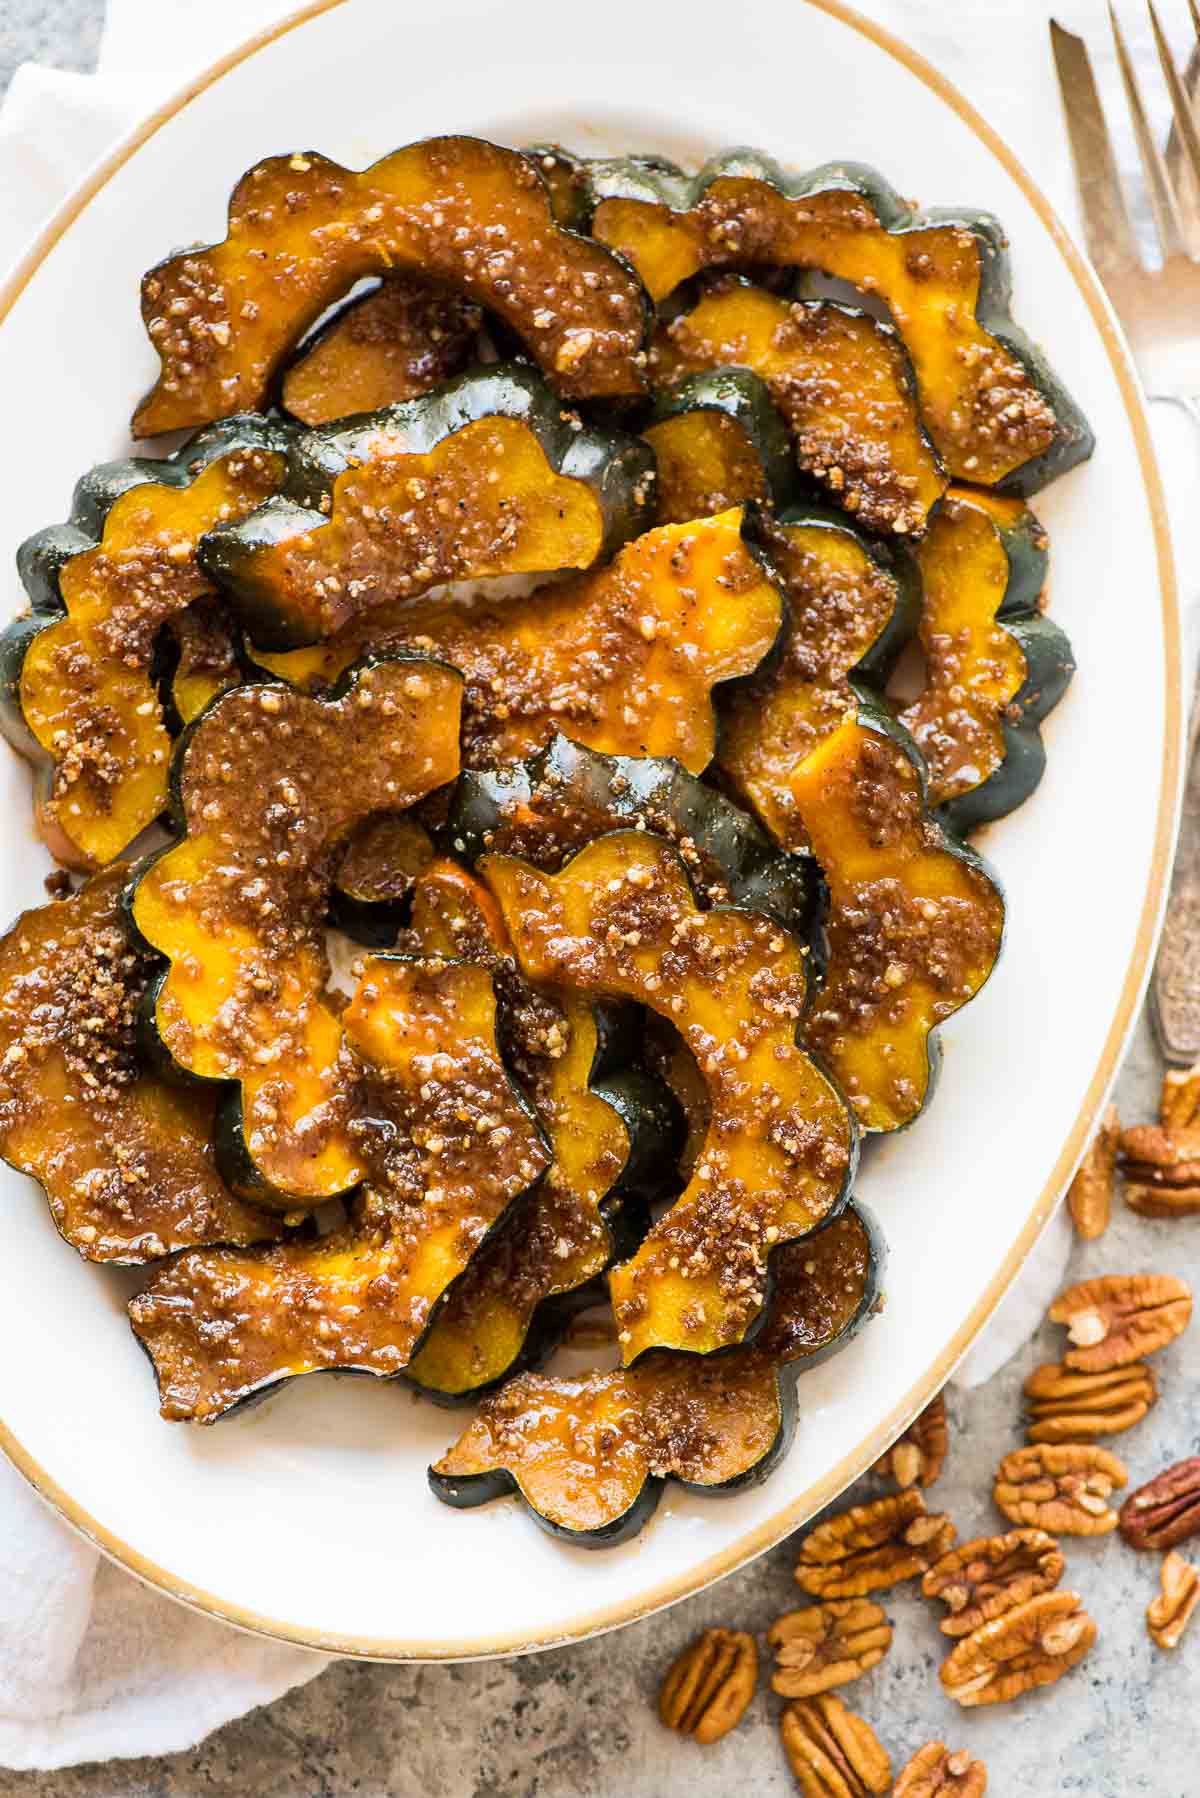 Baked Acorn Squash Slices with Brown Sugar and Pecans